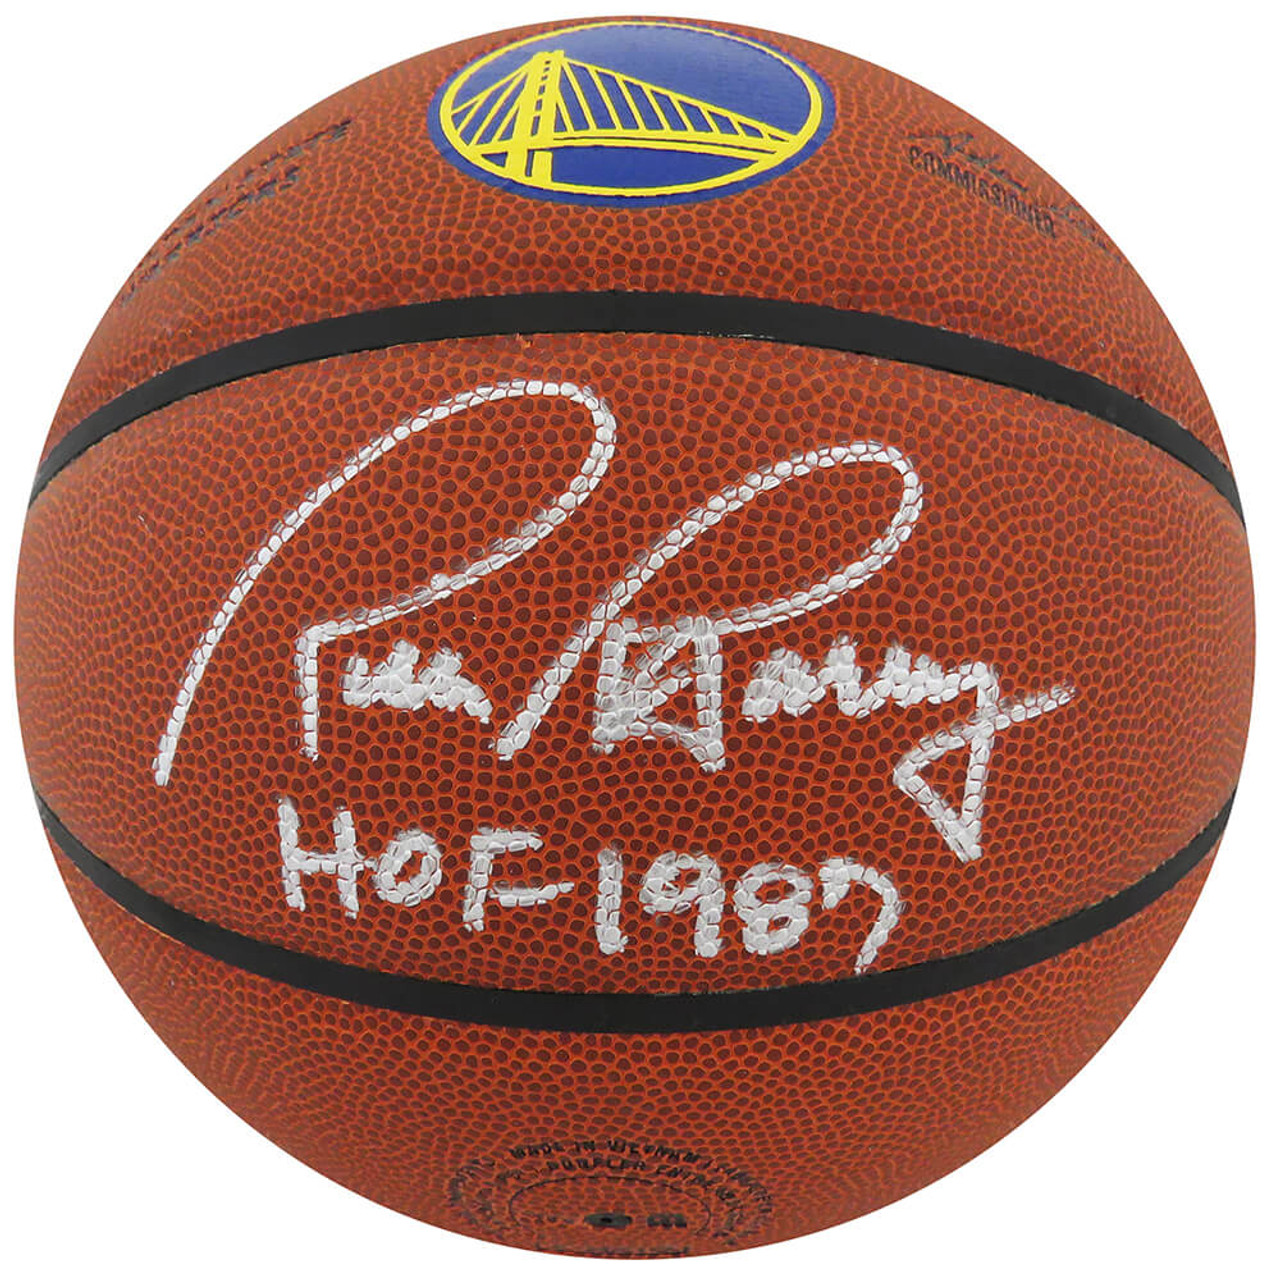 Autographed/Signed Rick Barry Golden State Yellow Basketball